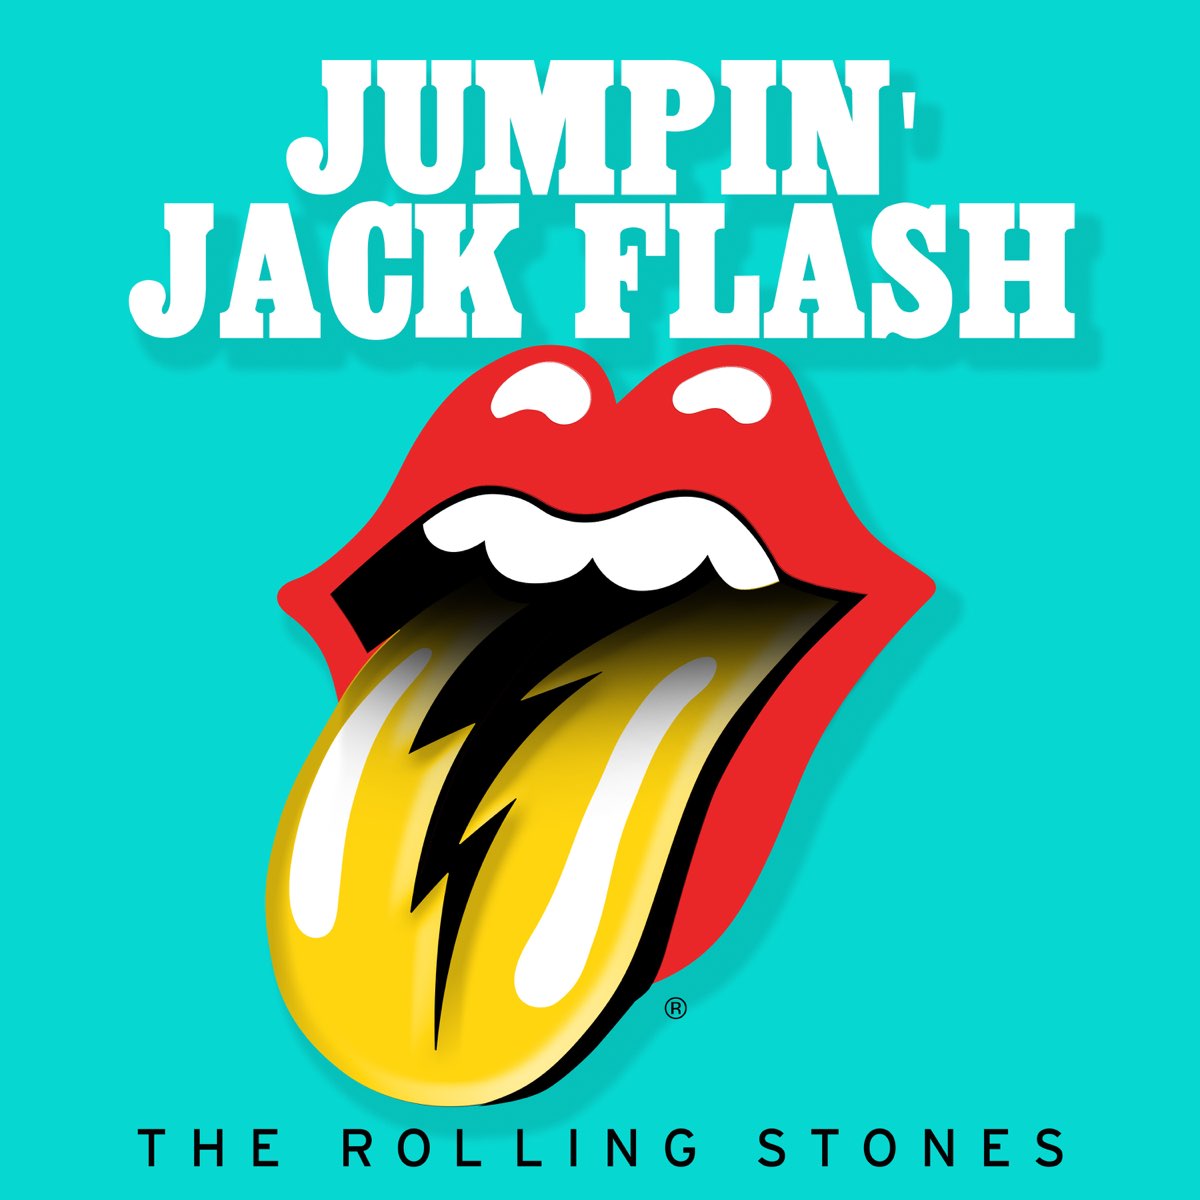 Jumpin' Jack Flash - EP by The Rolling Stones on Apple Music